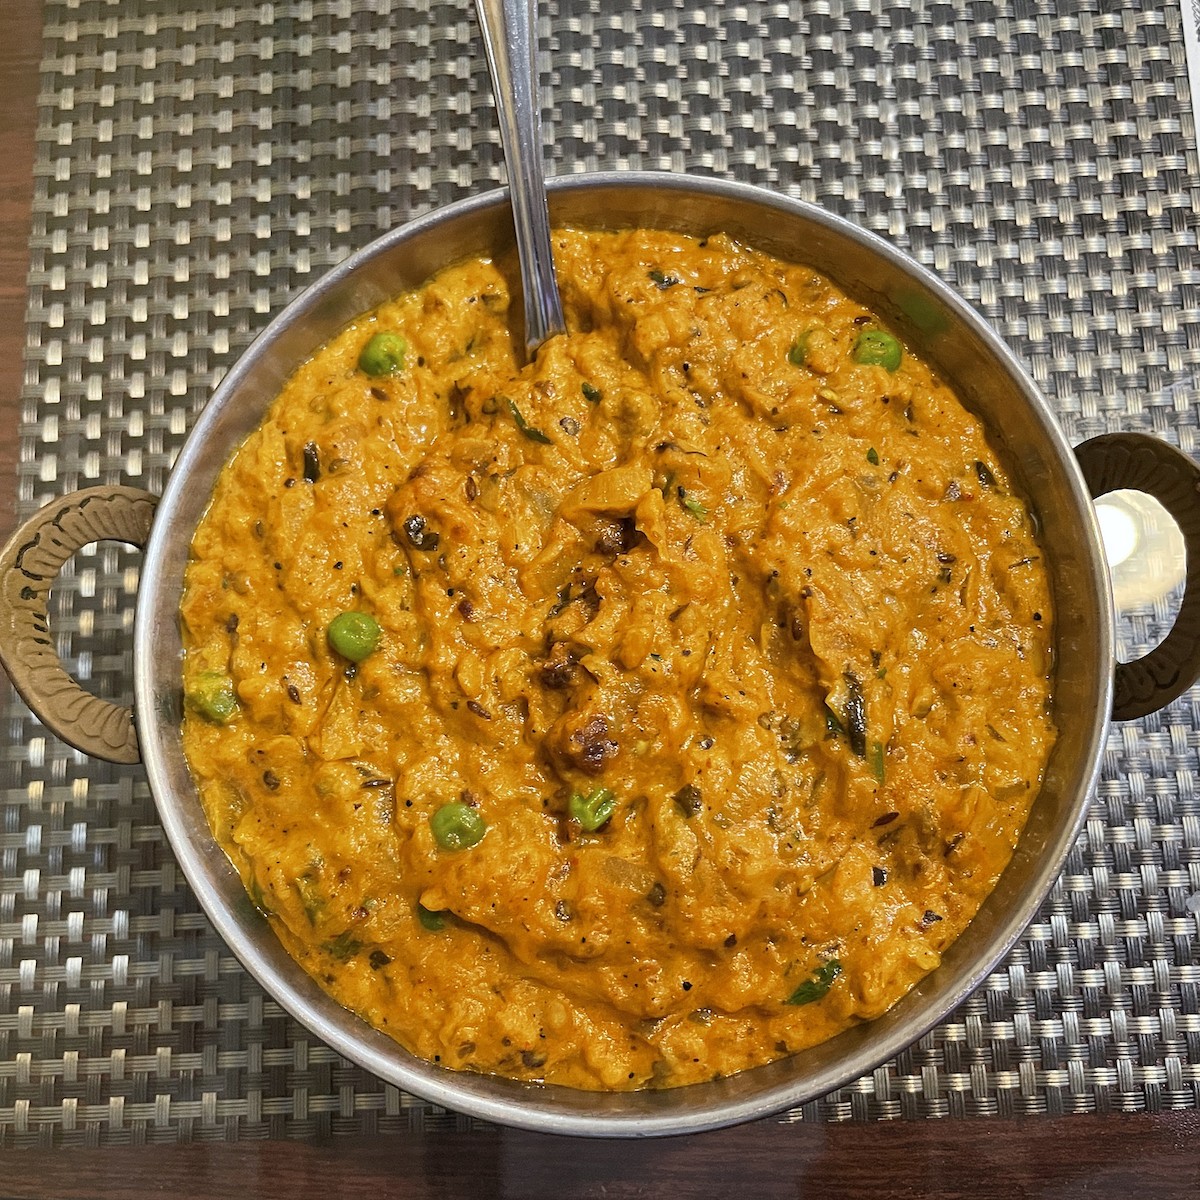 Clay Oven's baingan bharta, a deliciously spicy roasted and mashed eggplant curry, has its roots in the Punjab in far northern India.